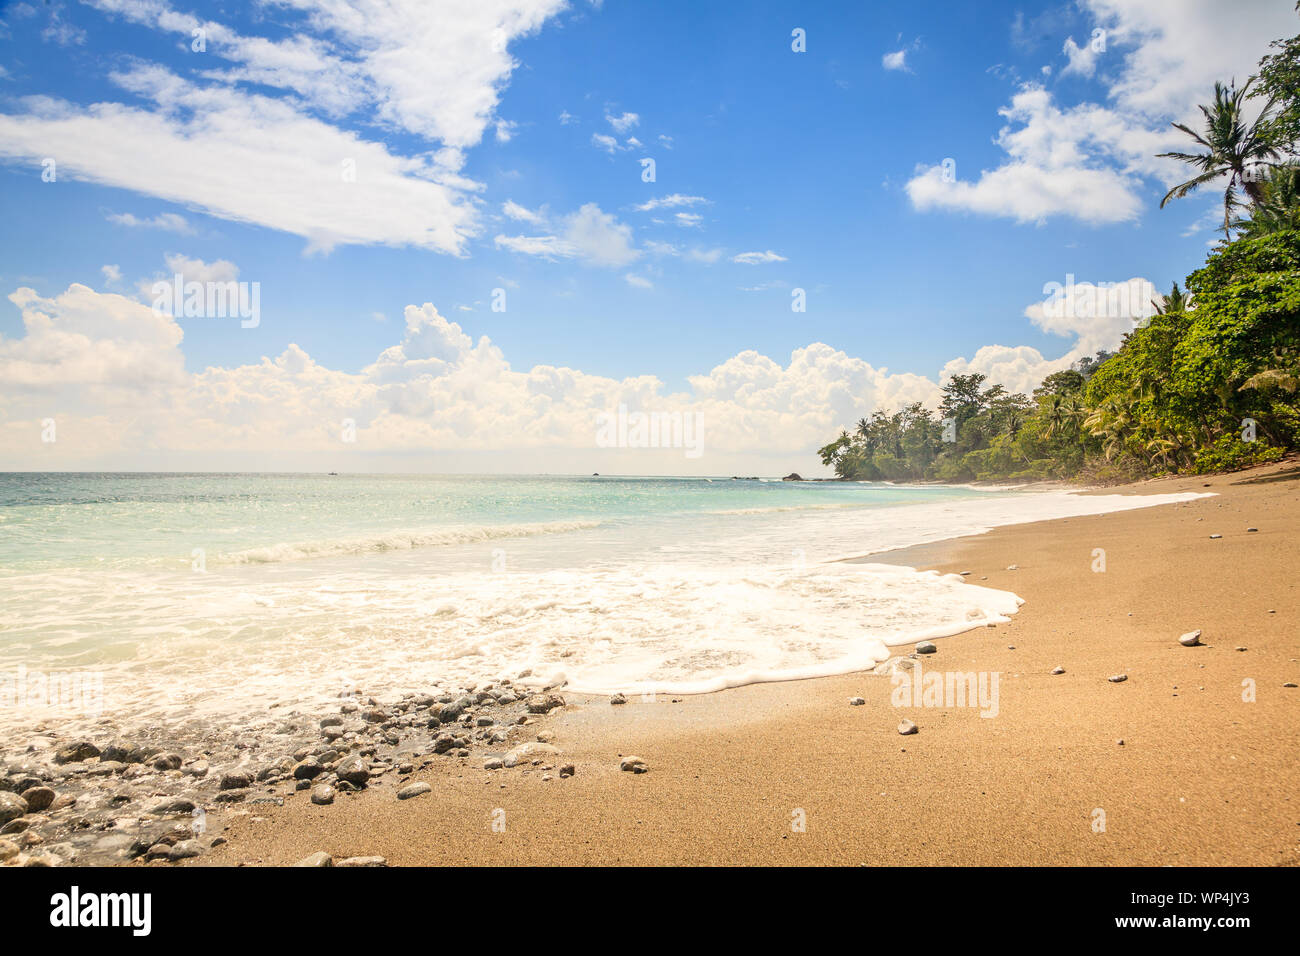 Scenic view of an empty beach in Corcovado National Park in Costa Rica Stock Photo